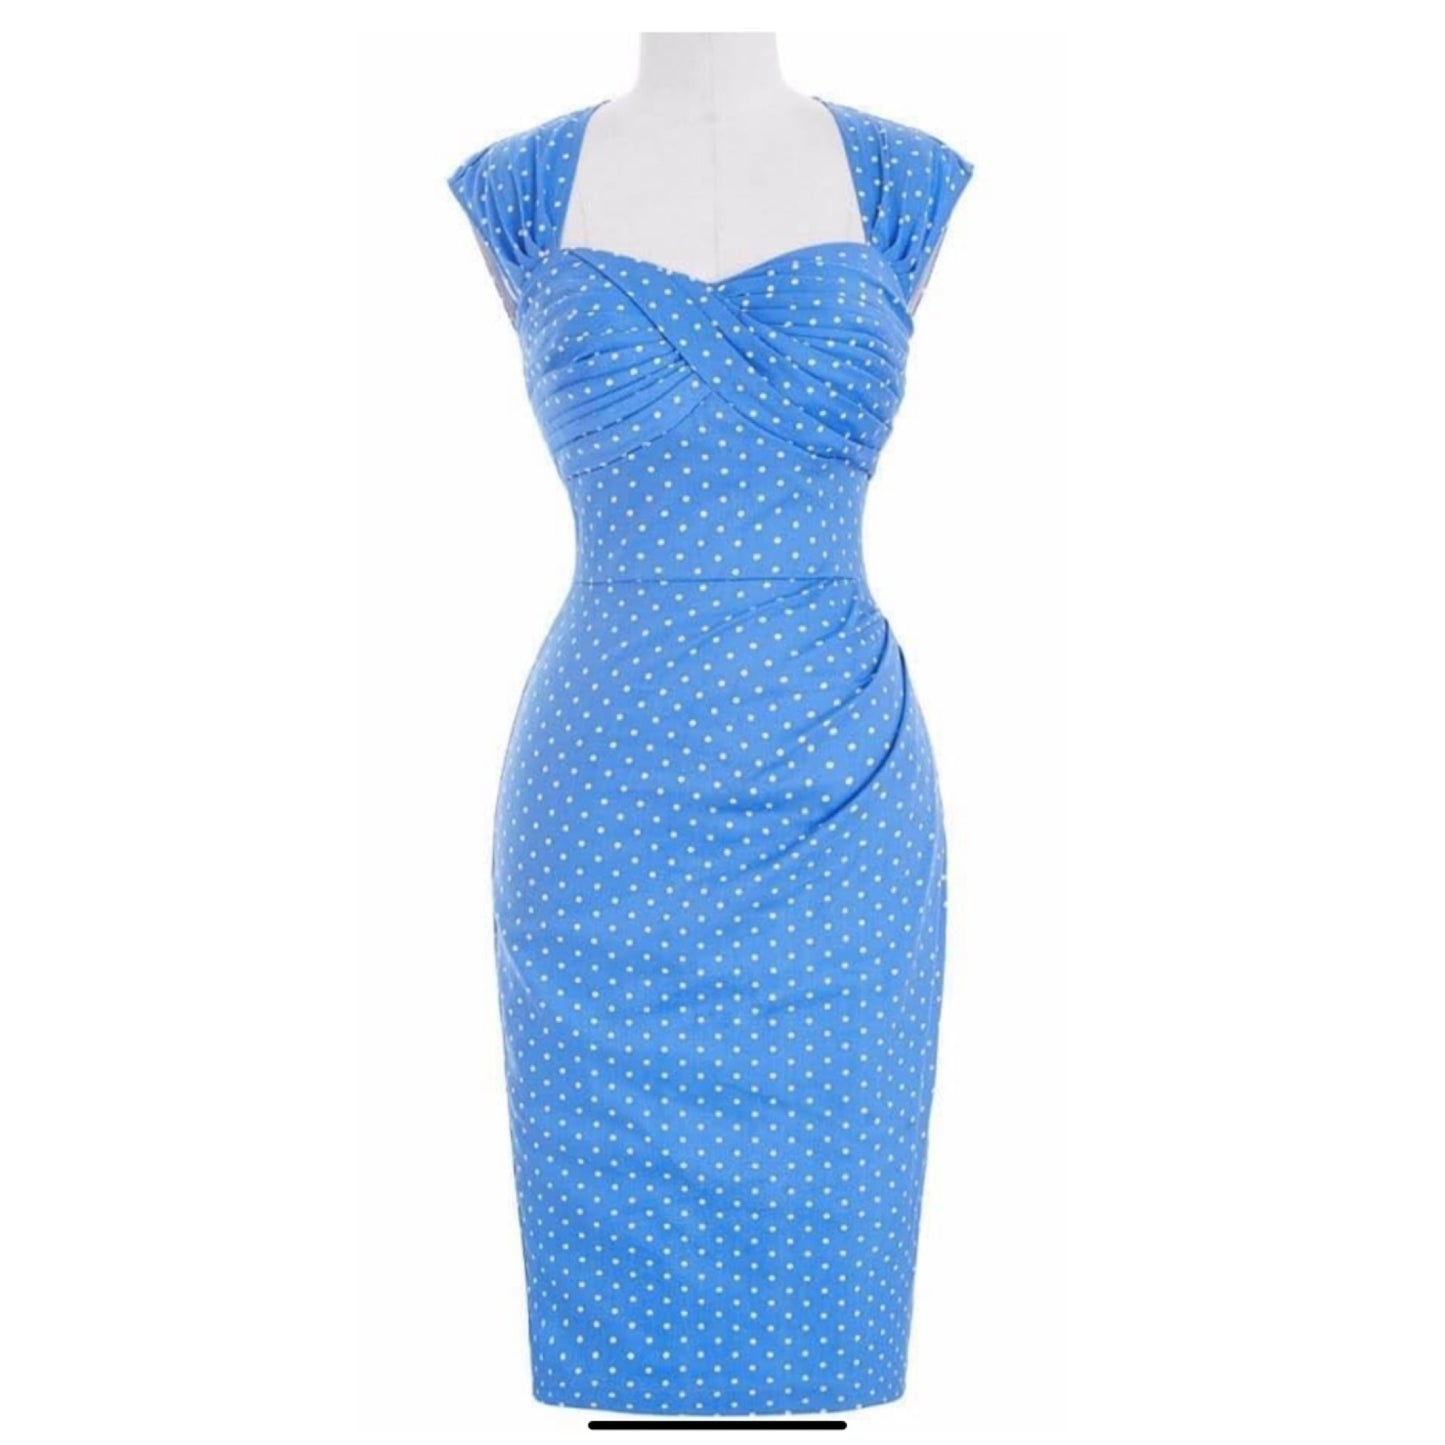 Vintage style blue white polka dots wiggle dress S M only